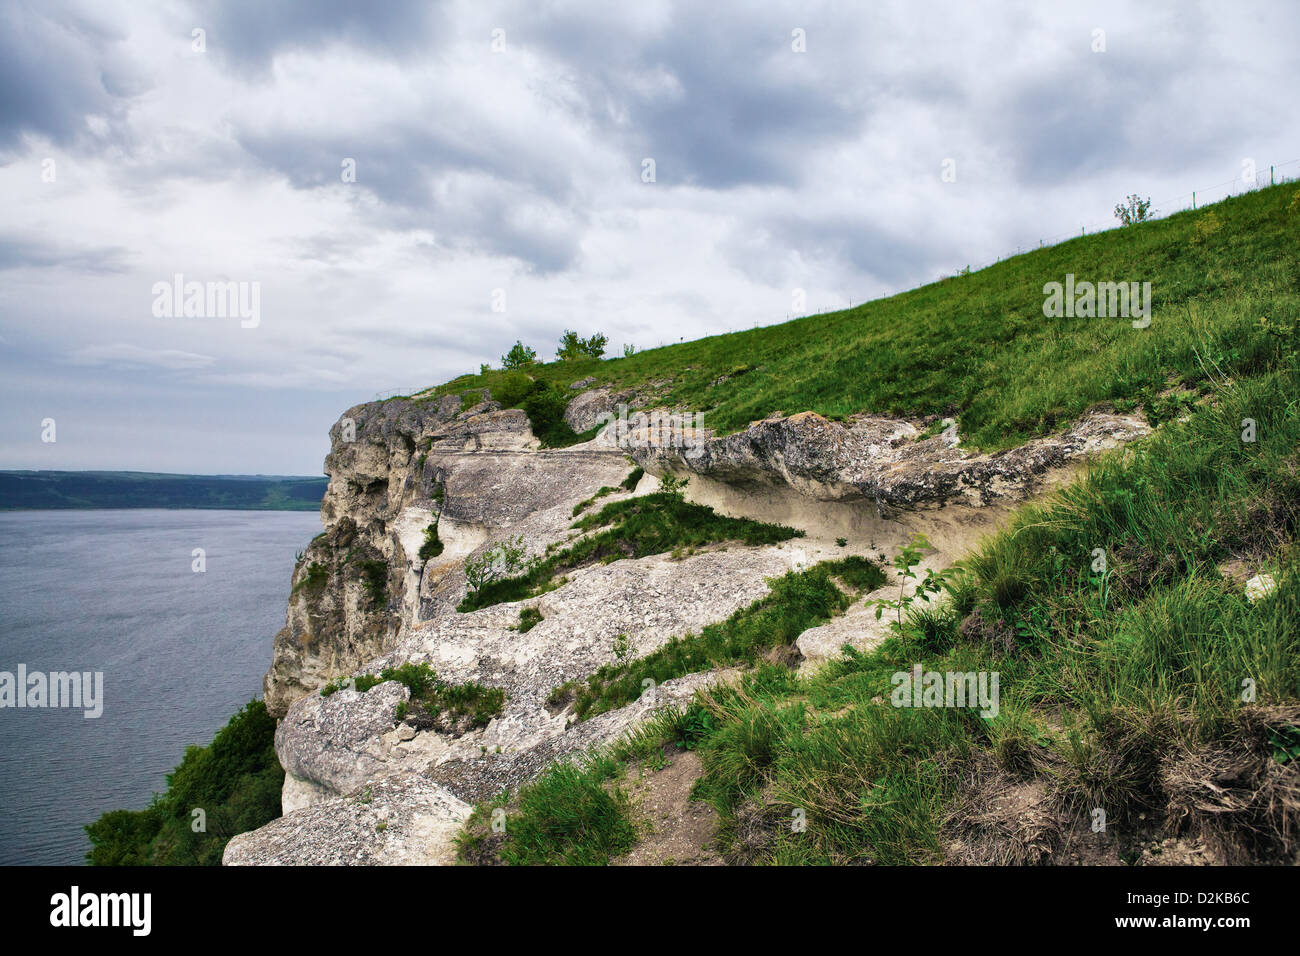 high rock over river at cloudy day, Dniester, Ukraine Stock Photo